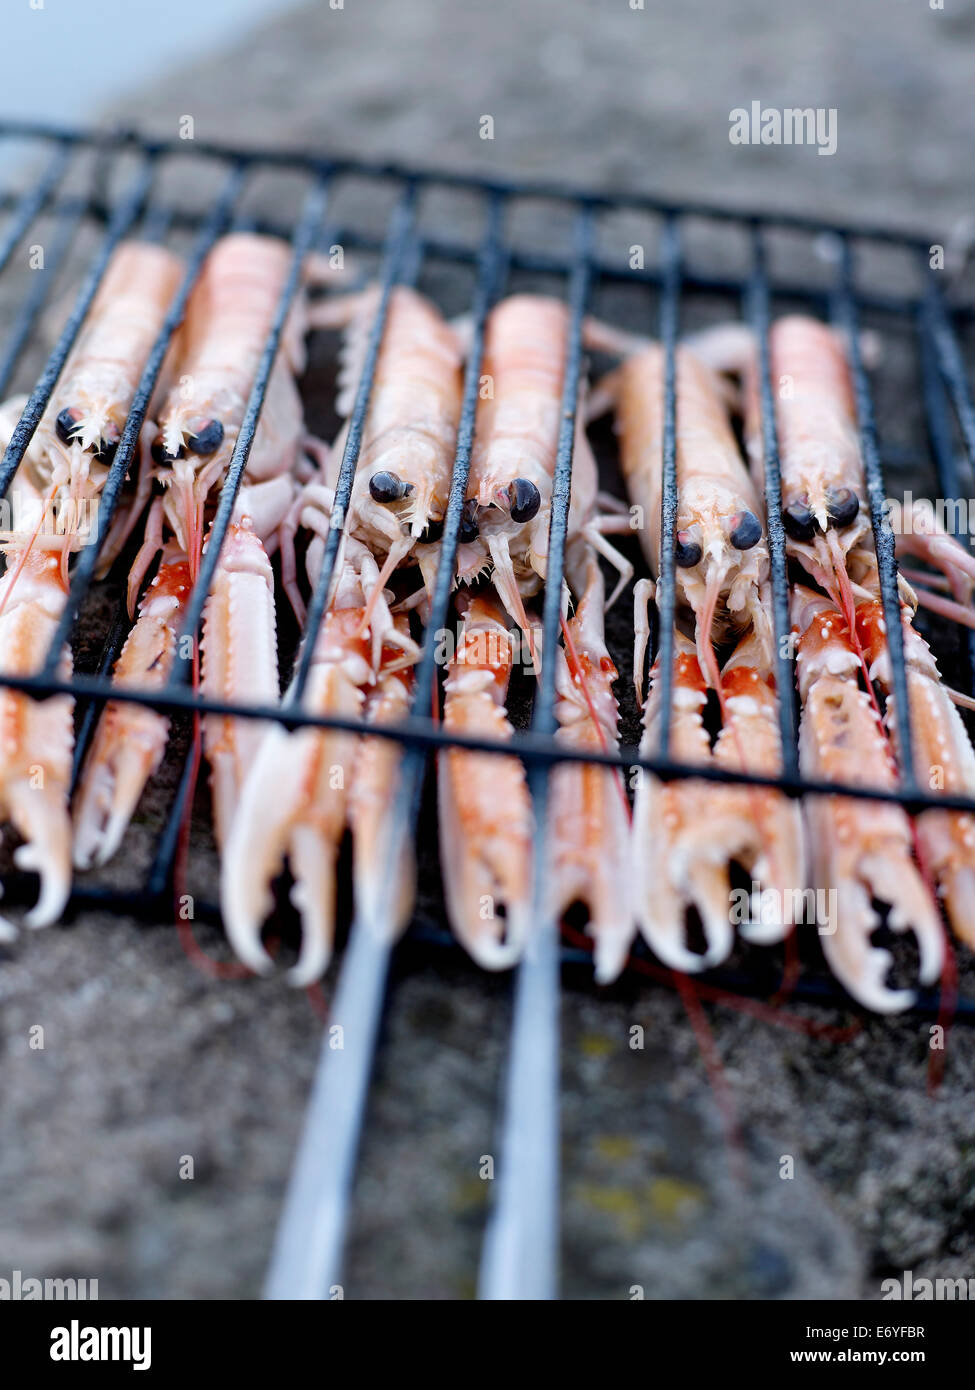 Dublin Bay prawns on the barbecue Stock Photo